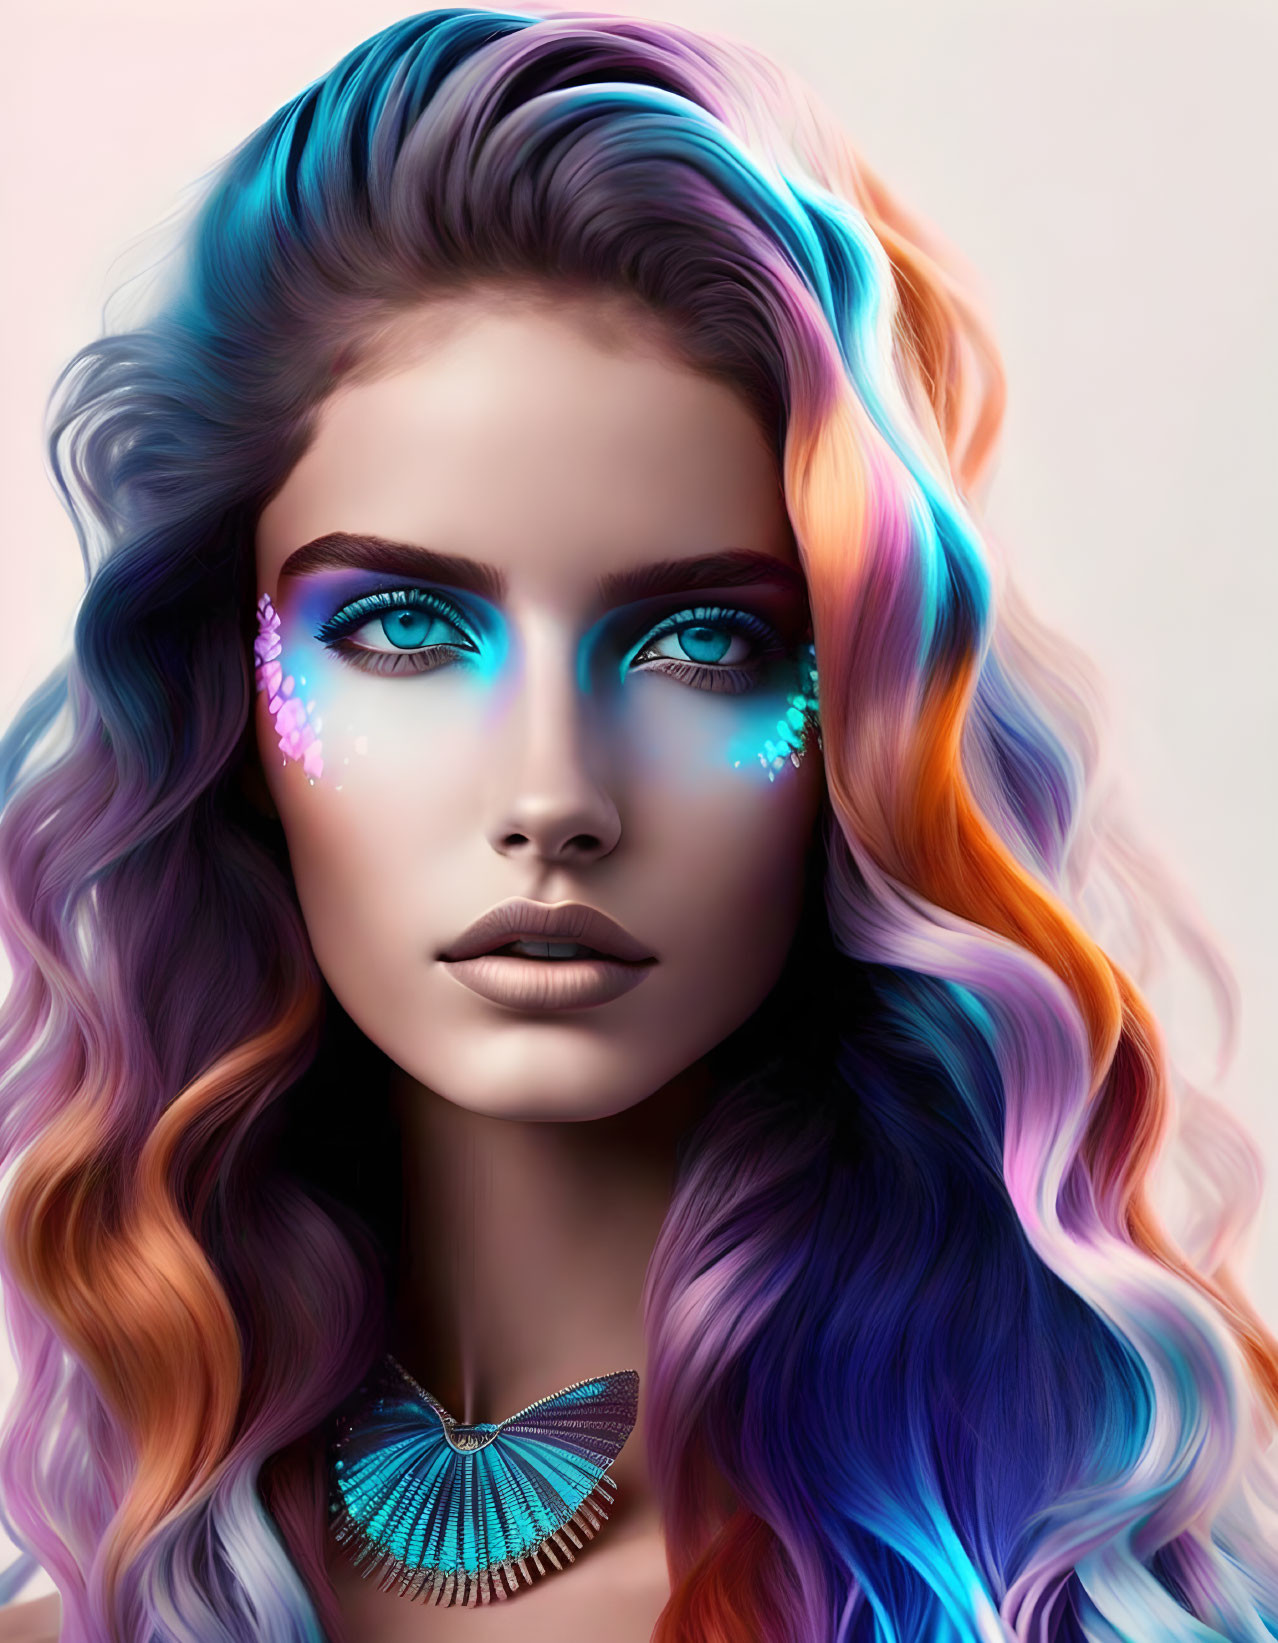 Colours waves on hair